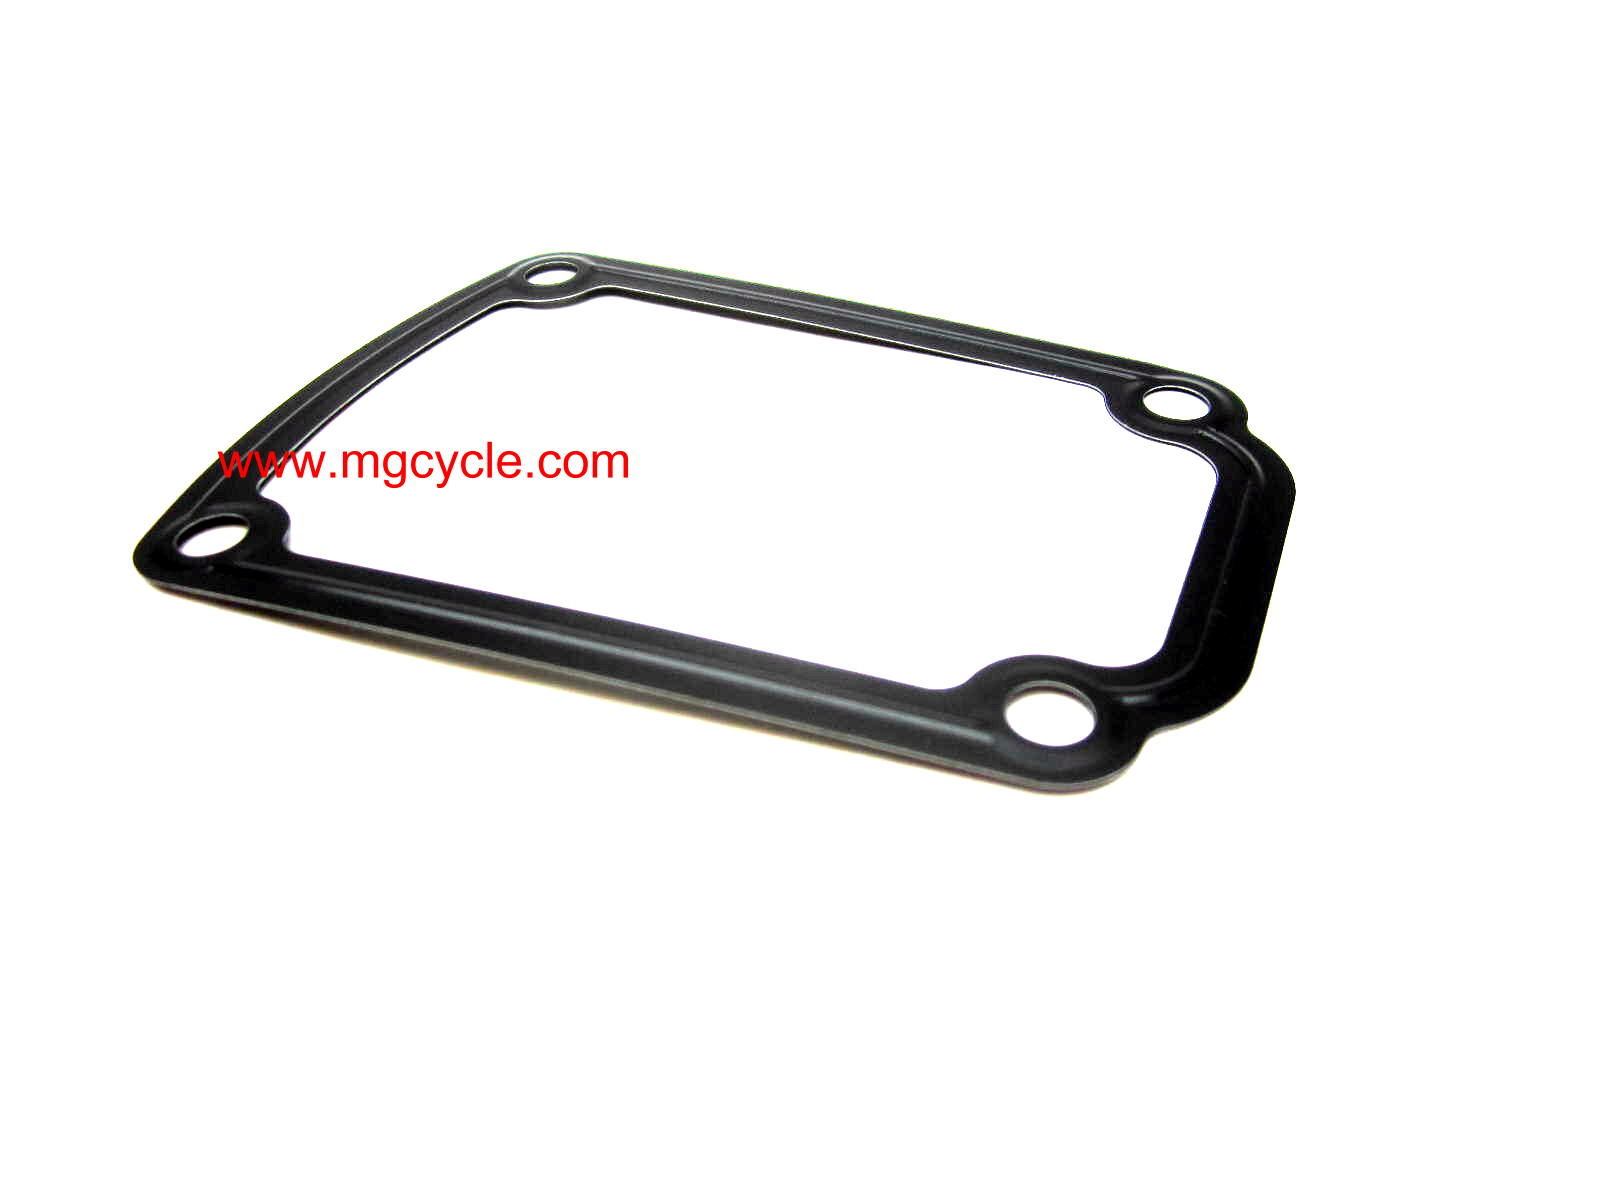 OEM Ducati metal valve cover gasket for 2 valve engines - Click Image to Close